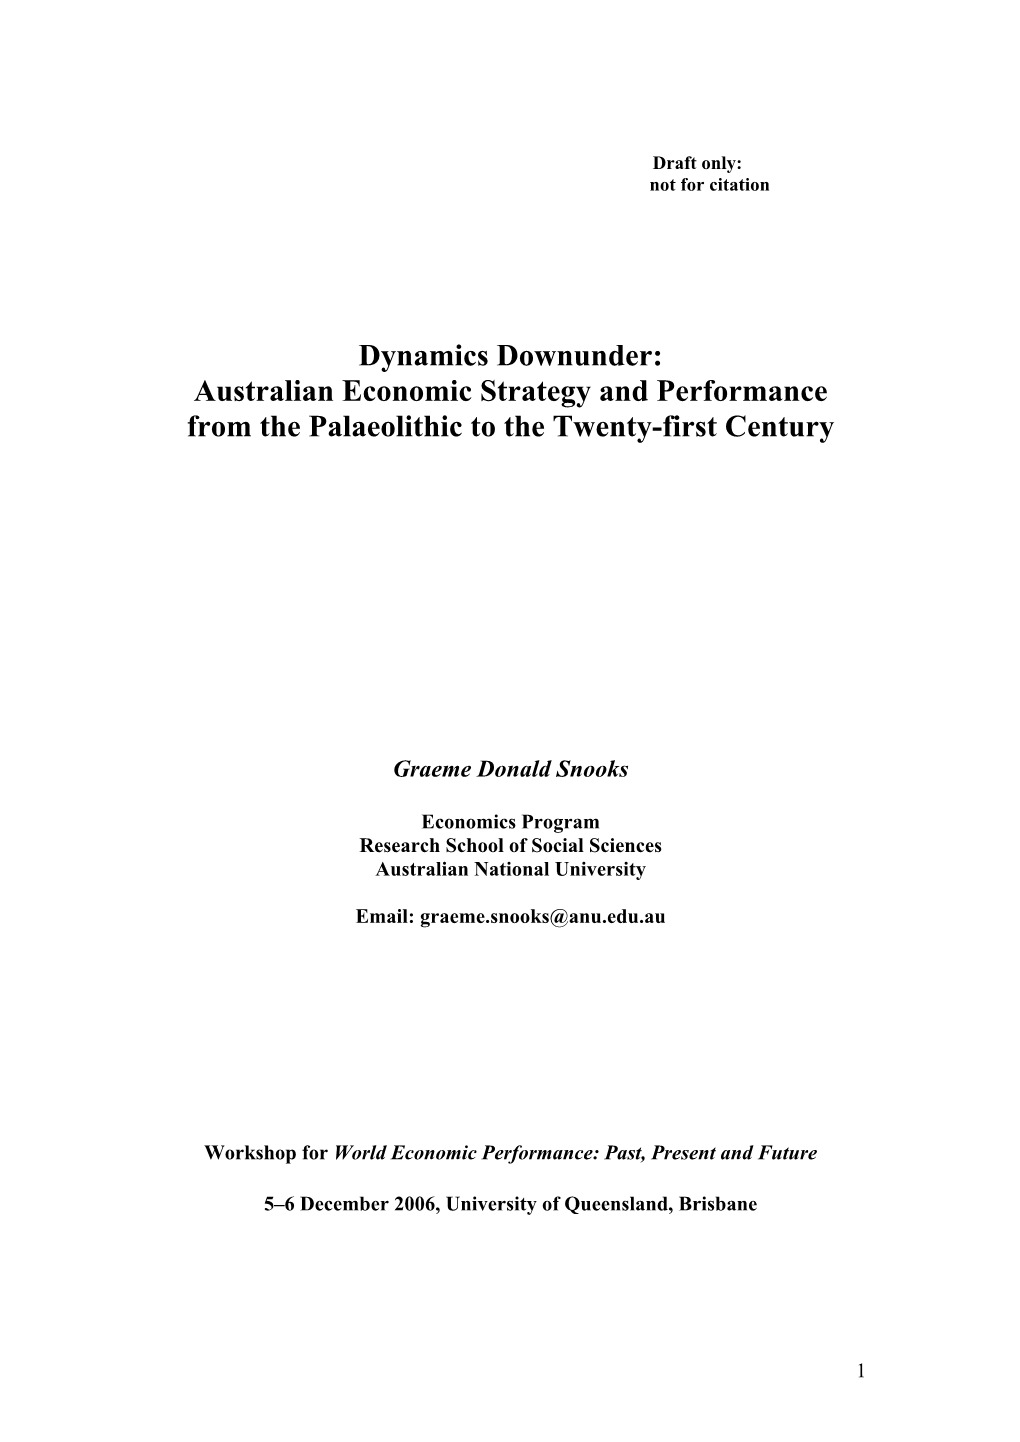 Dynamics Downunder: Australian Economic Strategy and Performance from the Palaeolithic to the Twenty-First Century